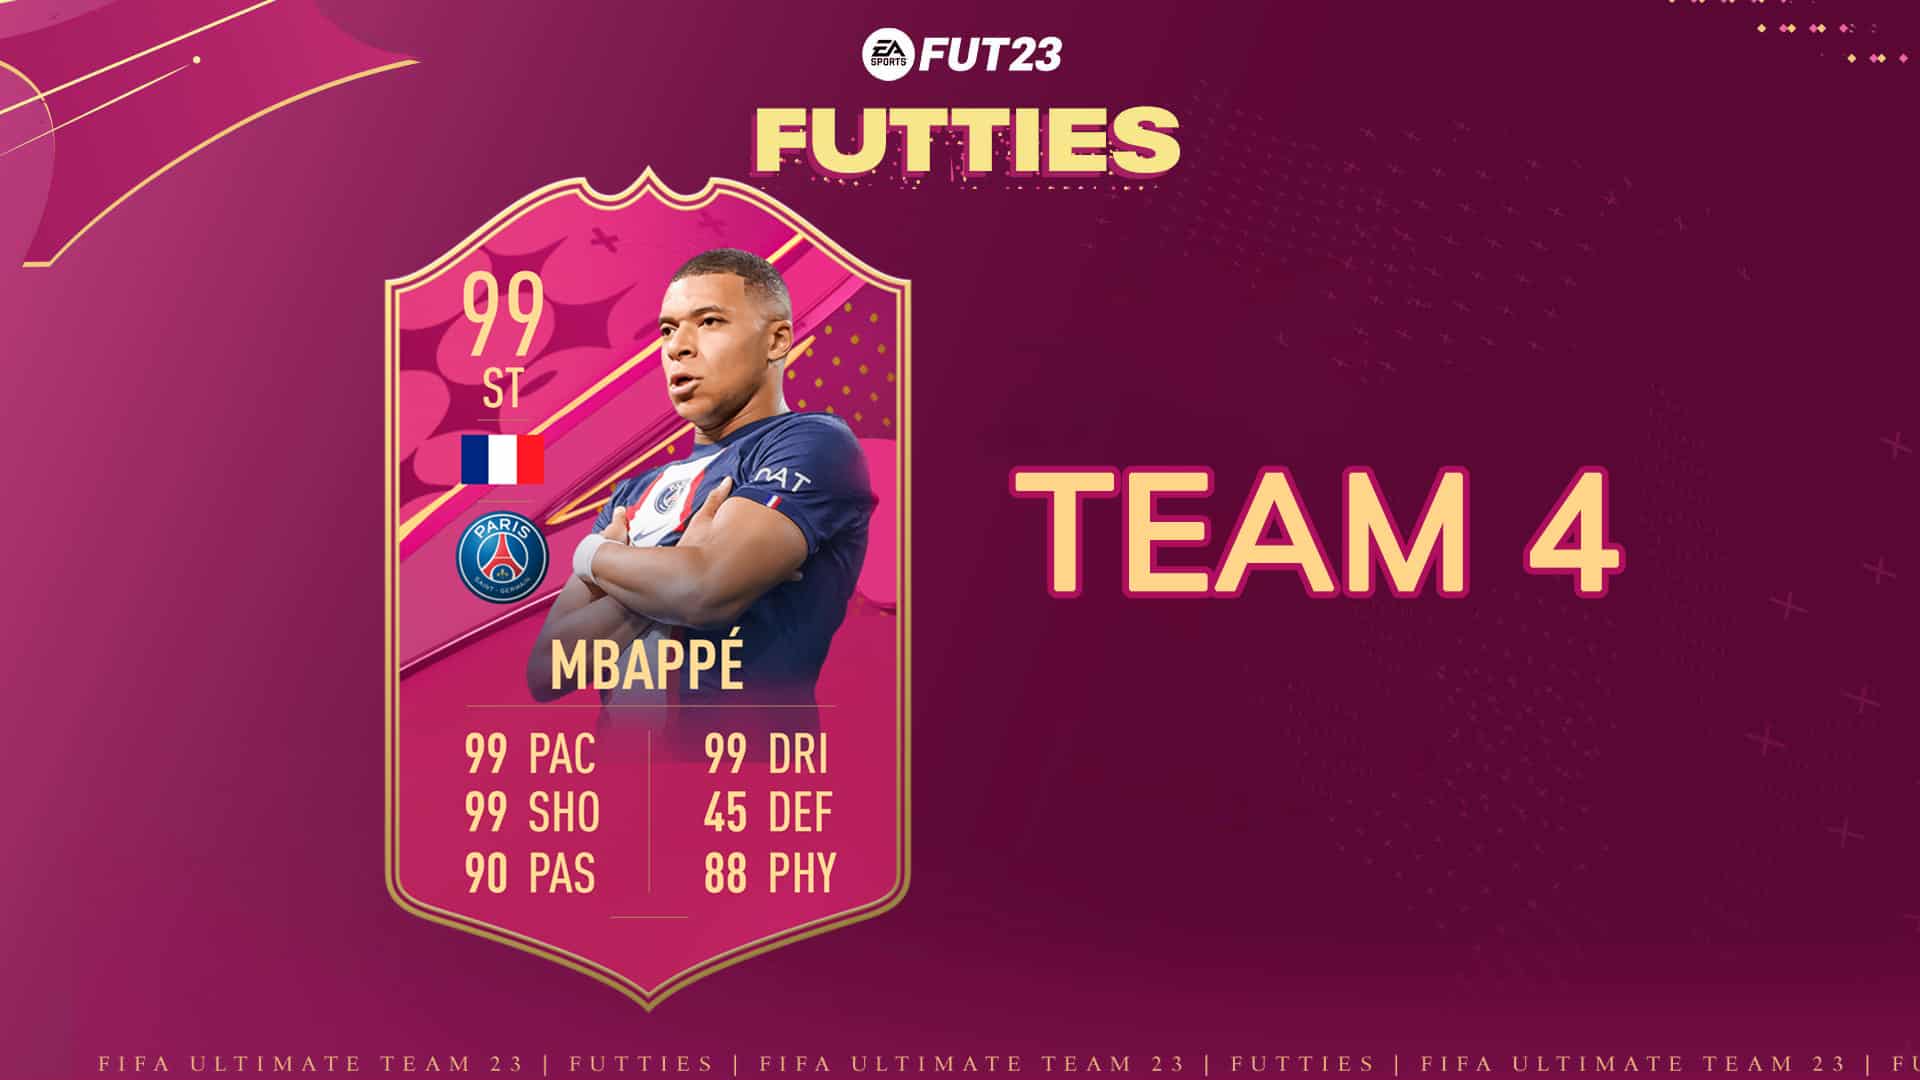 FIFA 23 FUTTIES Heroes Team 4 Release, Leaks and Predictions